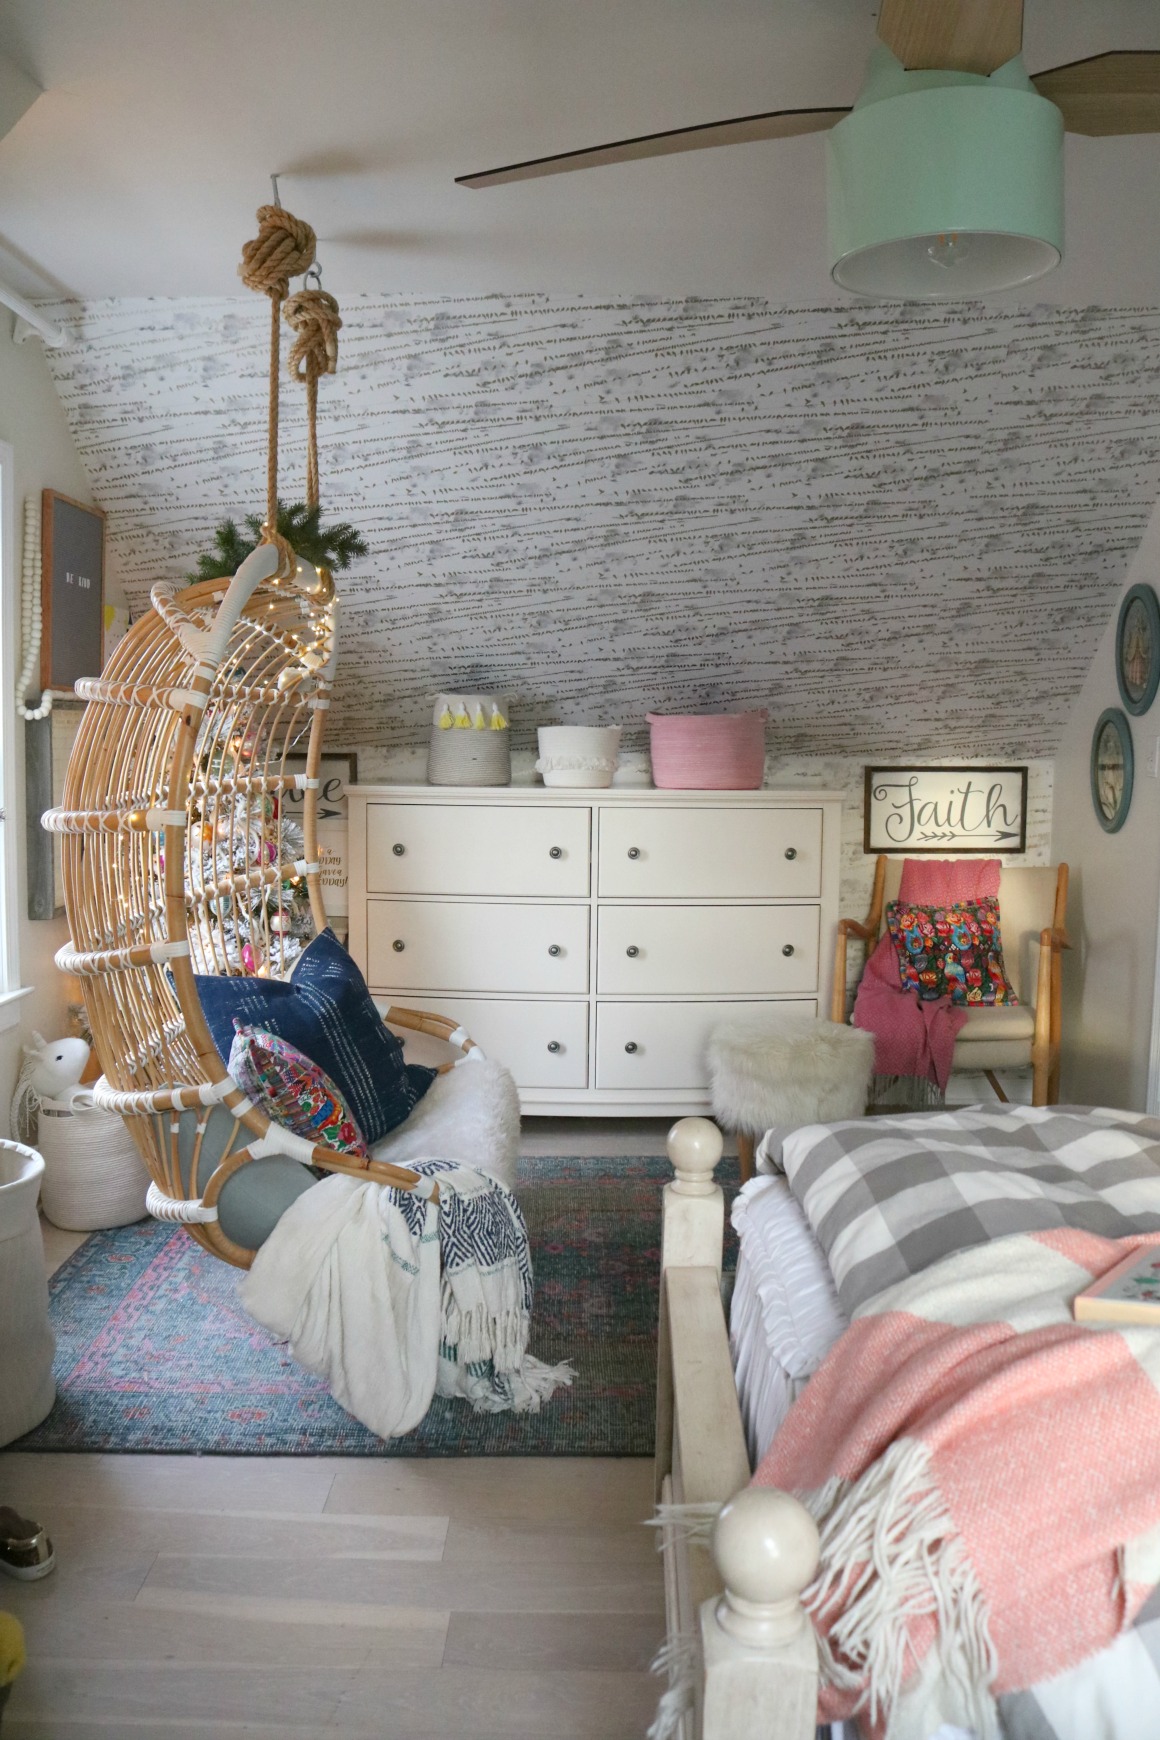 Christmas Decor in a Small Cape- Girls Shared Bedroom 0332